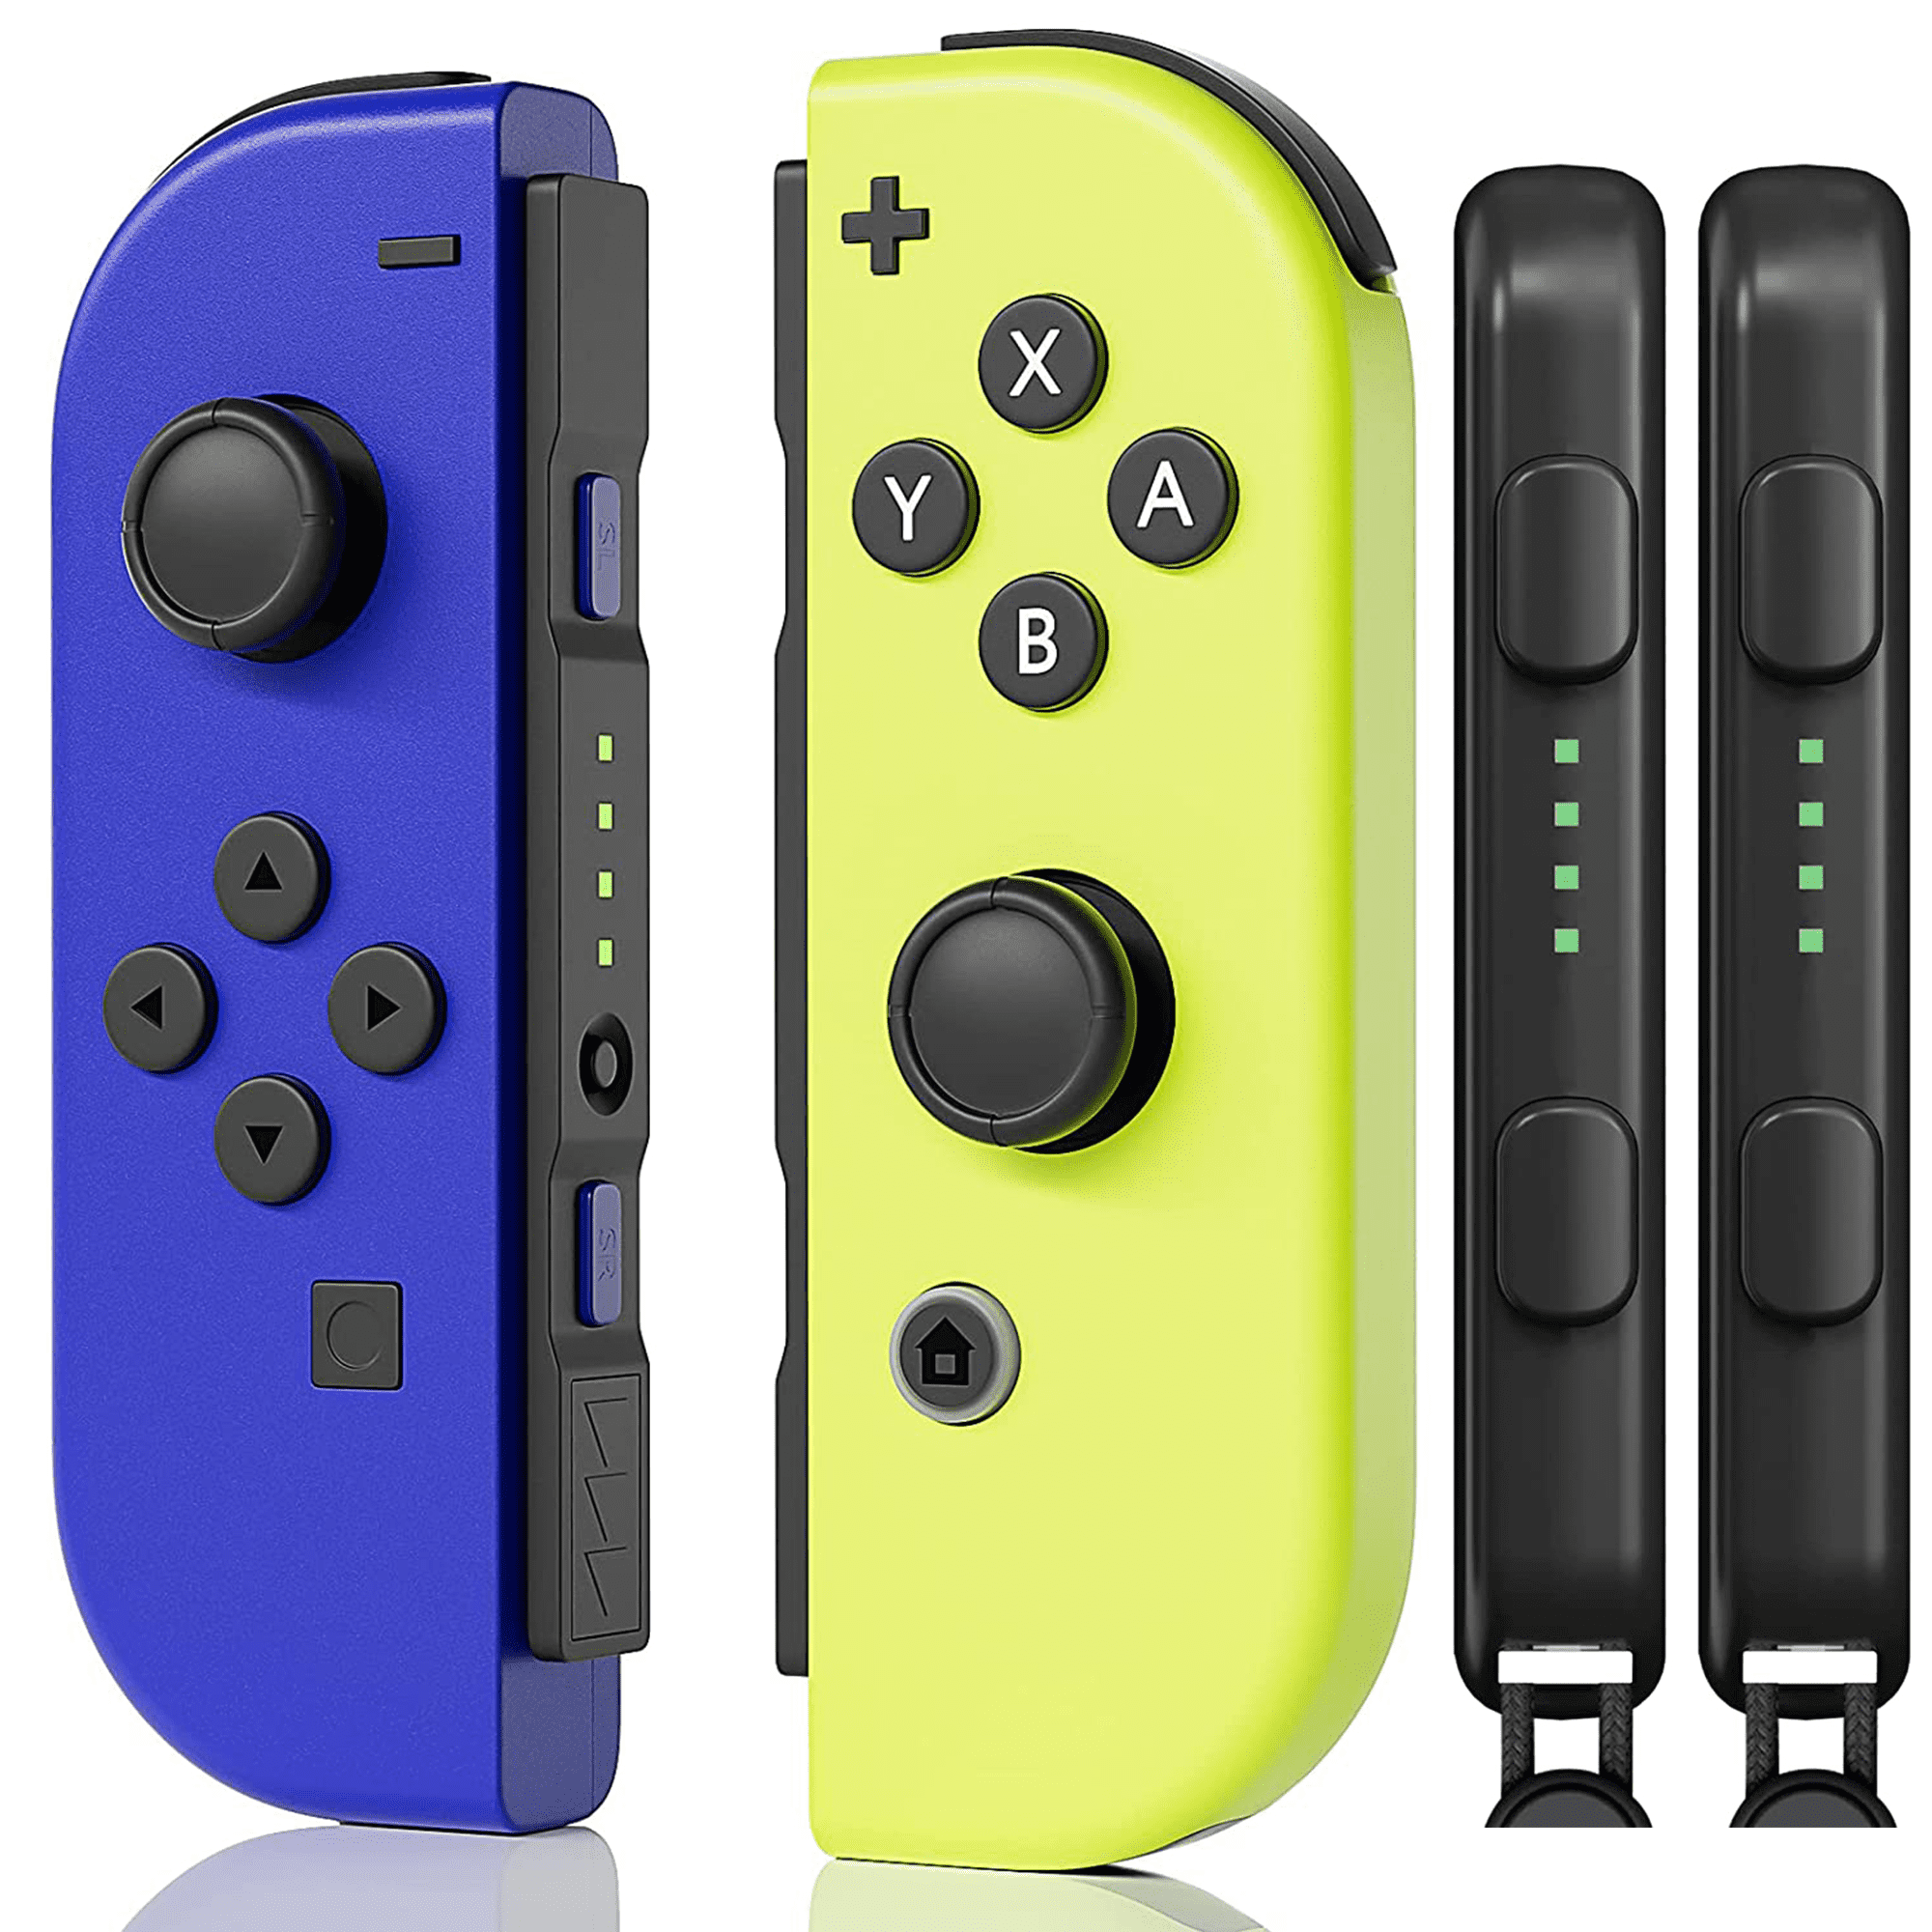 JoyPad (L/R) Controller for Nintendo Switch Controller - Neon Blue/Neon  Yellow Game Joypad